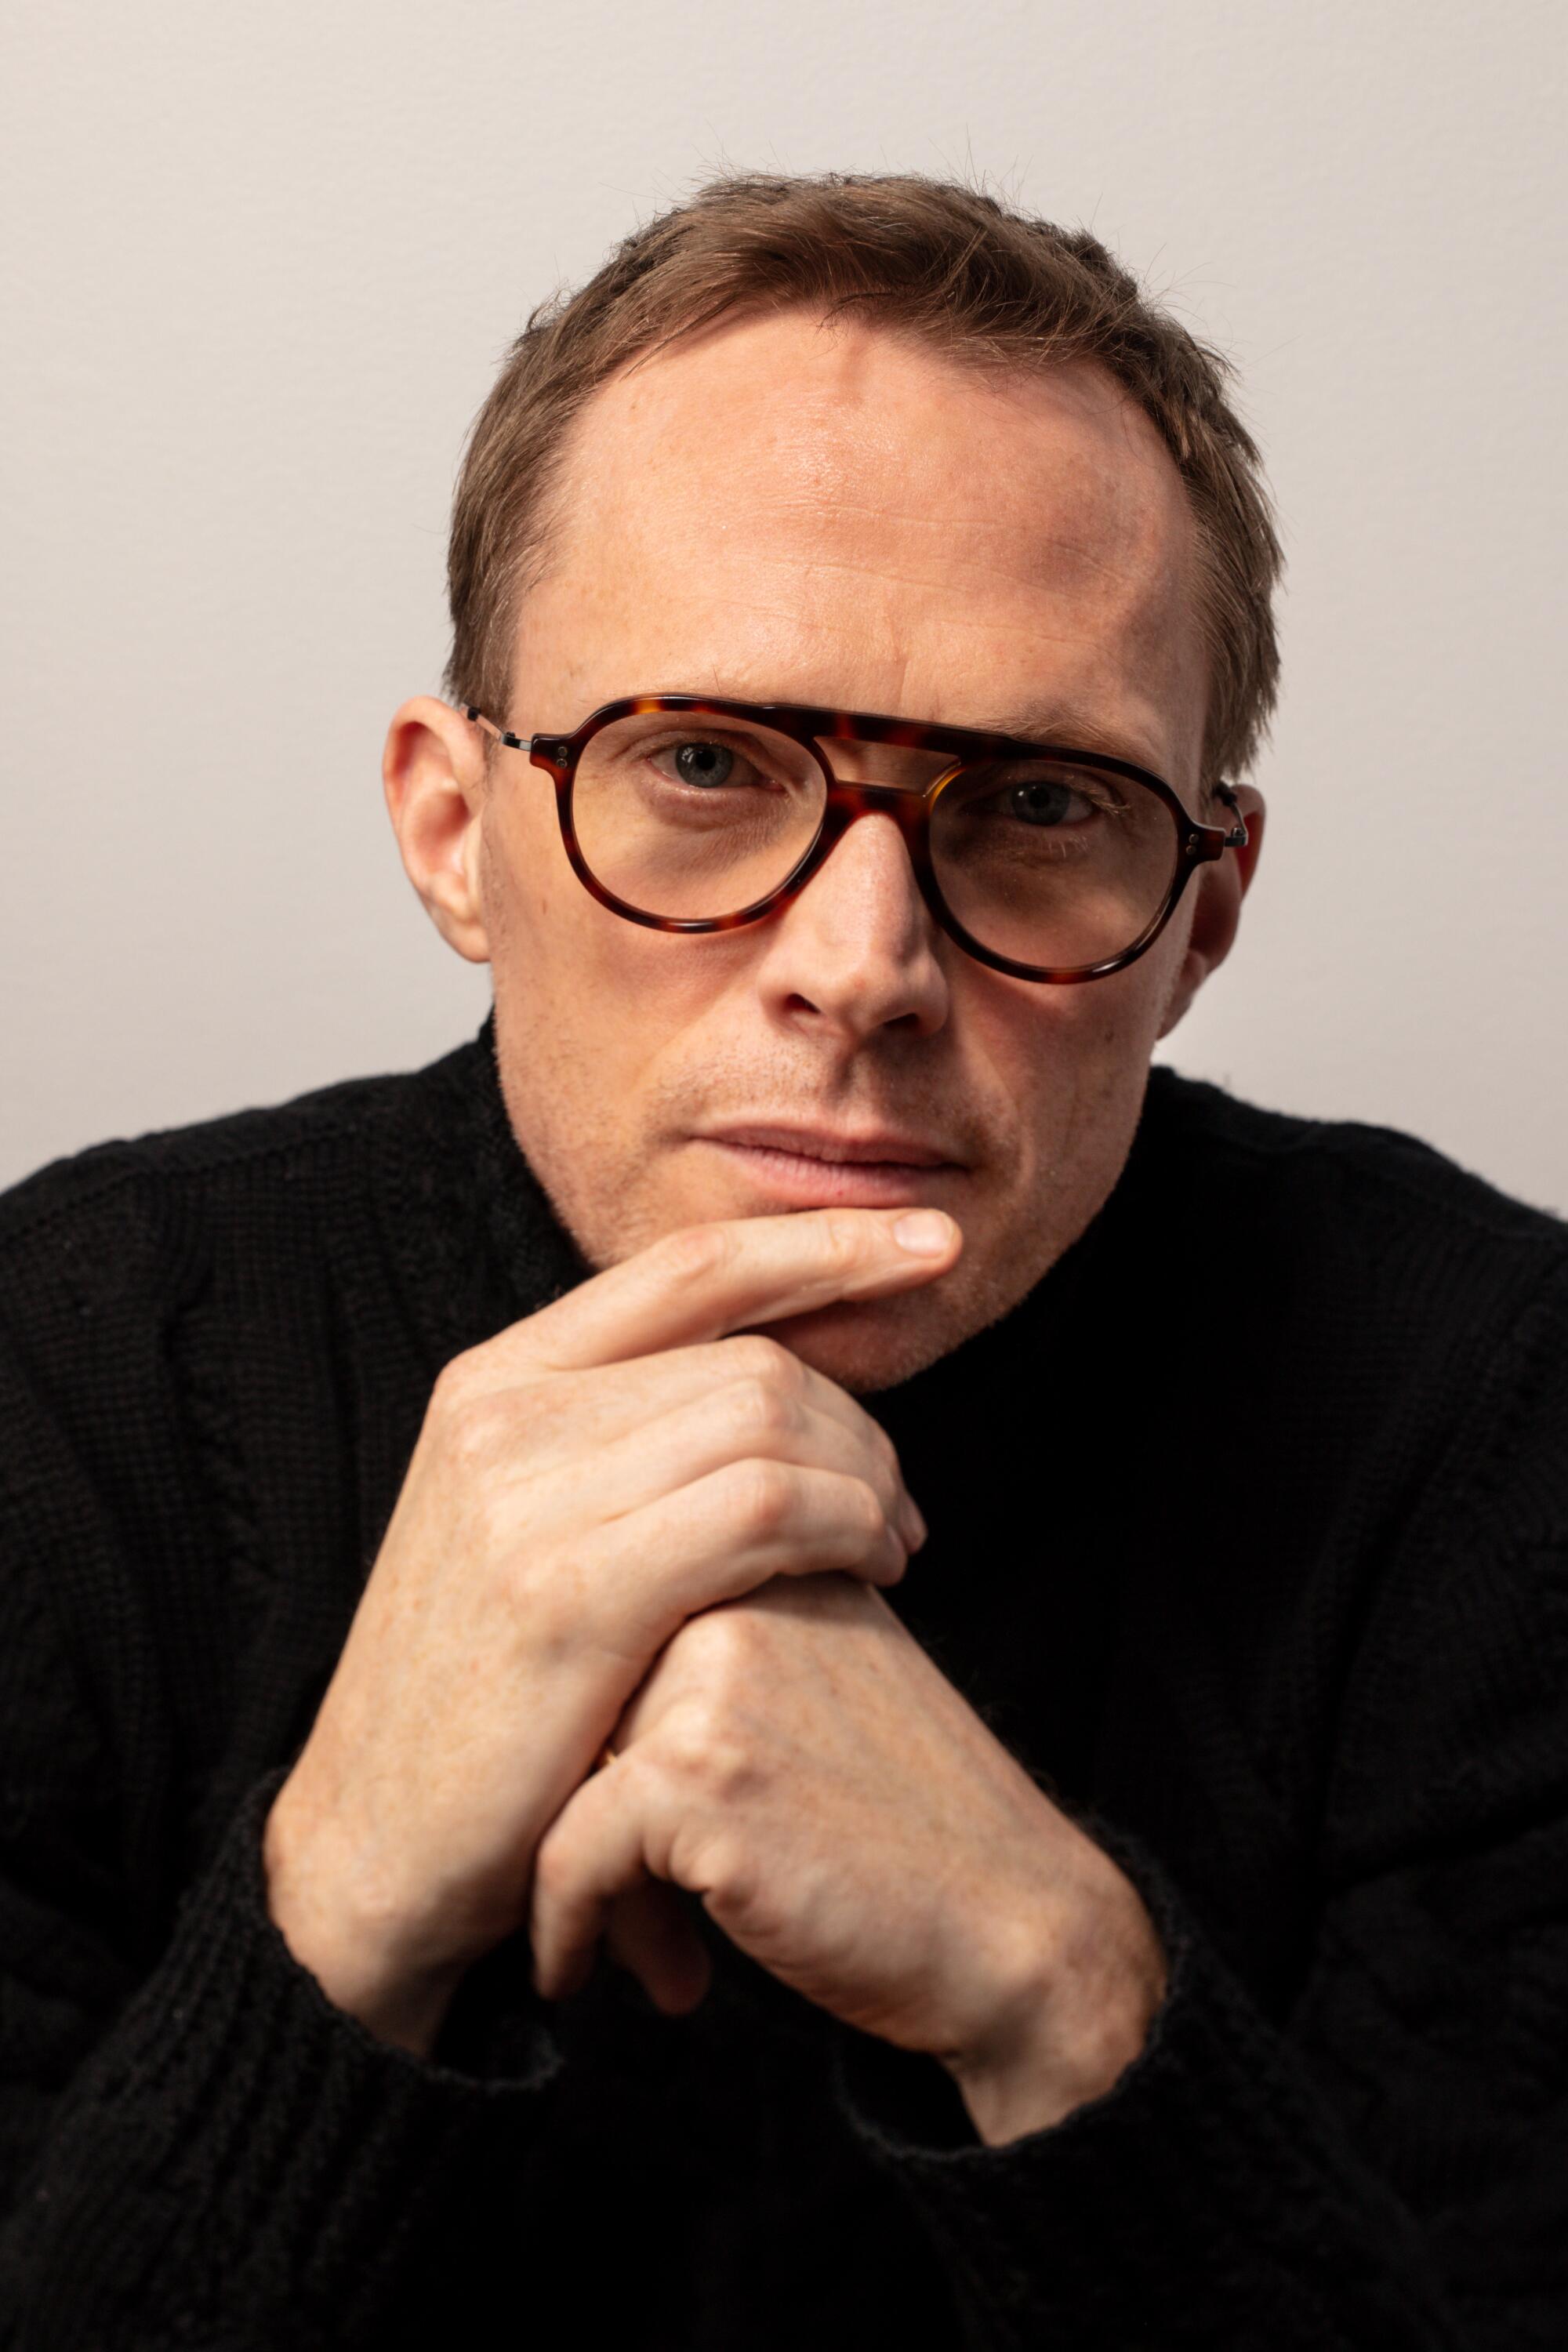 PARK CITY, UTAH - JANUARY 26: Actor Paul Bettany of “Uncle Frank,” photographed in the L.A. Times Studio at the Sundance Film Festival on Sunday, Jan. 26, 2020 in Park City, Utah. (Jay L. Clendenin / Los Angeles Times)